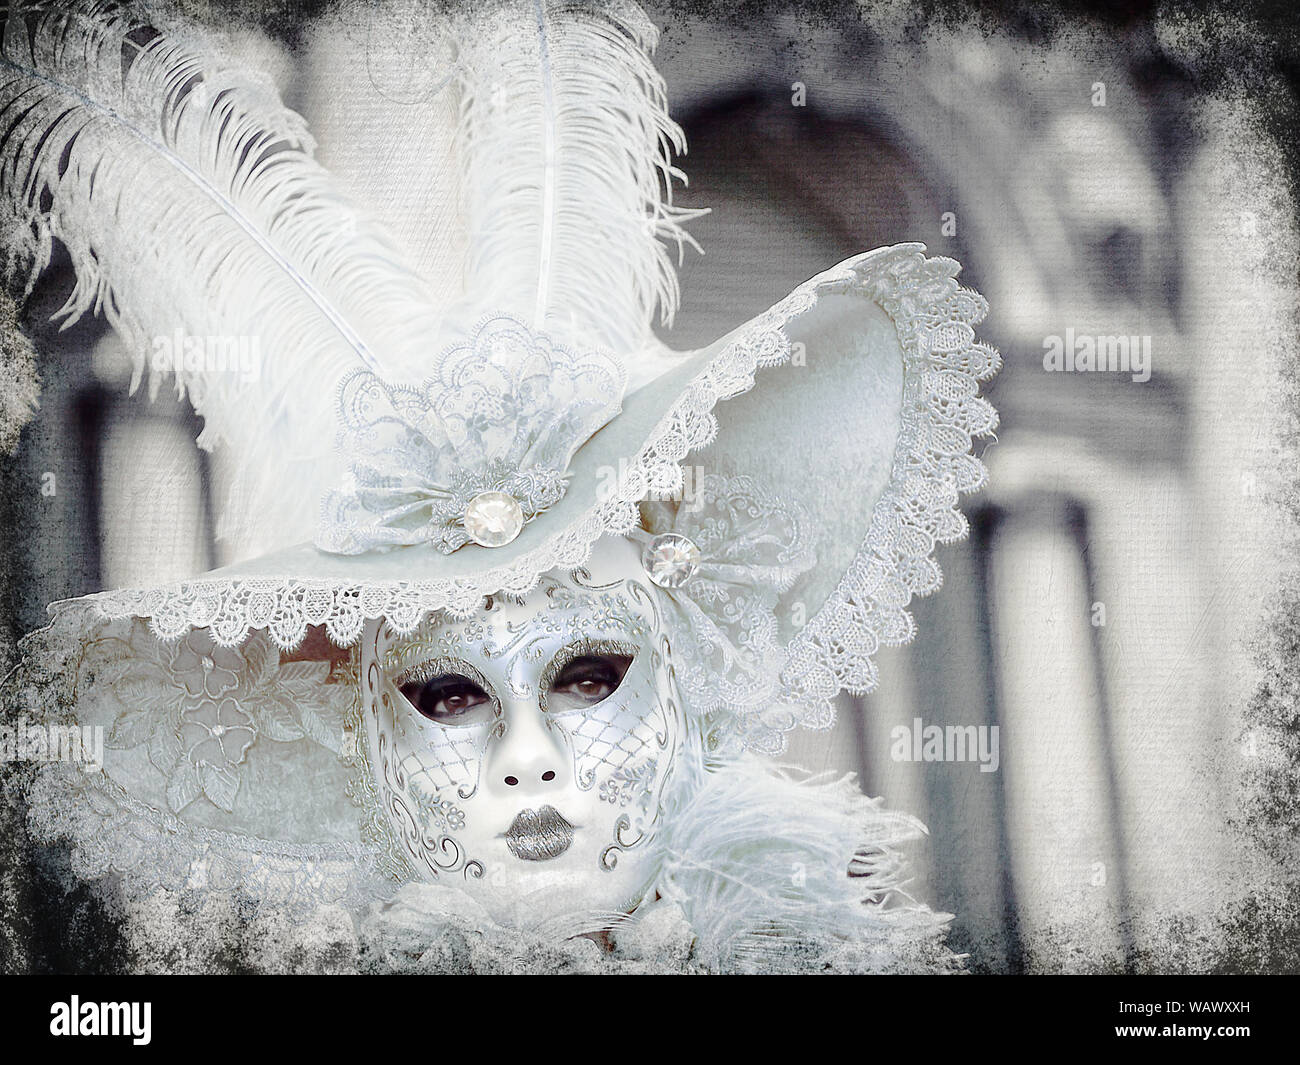 Venice Carnival (Carnevale) takes place in the run up to lent. See the city at its most colourful, with masks, costumes, & opulent masquerade balls. Stock Photo